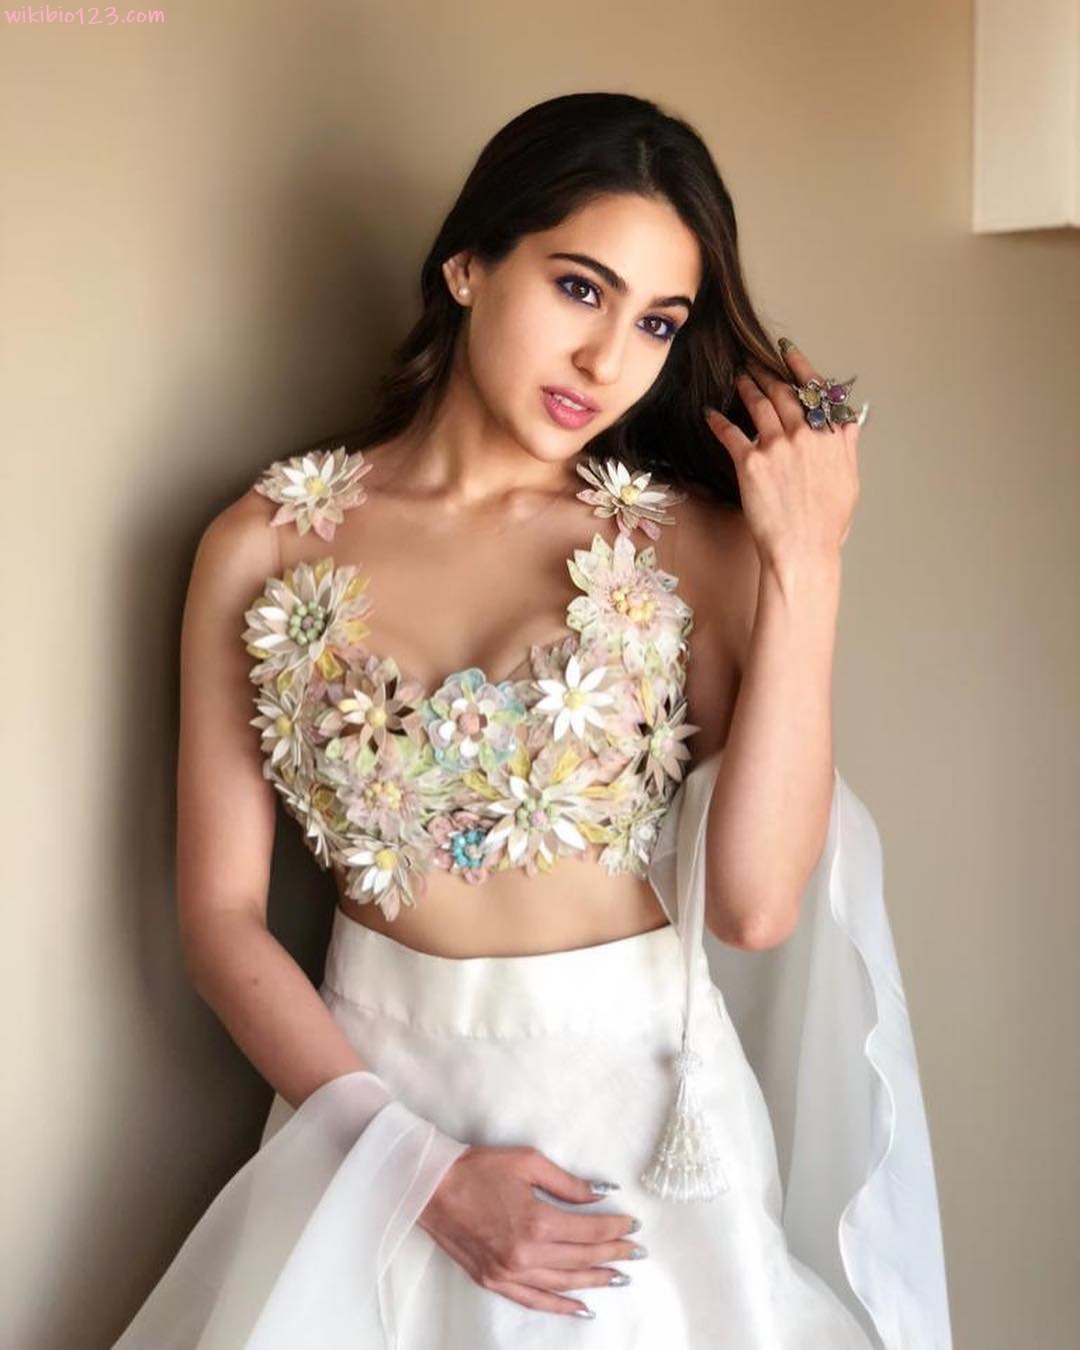 Sara Ali Khan wiki Bio Age Figure size Height HD Images Wallpapers Download